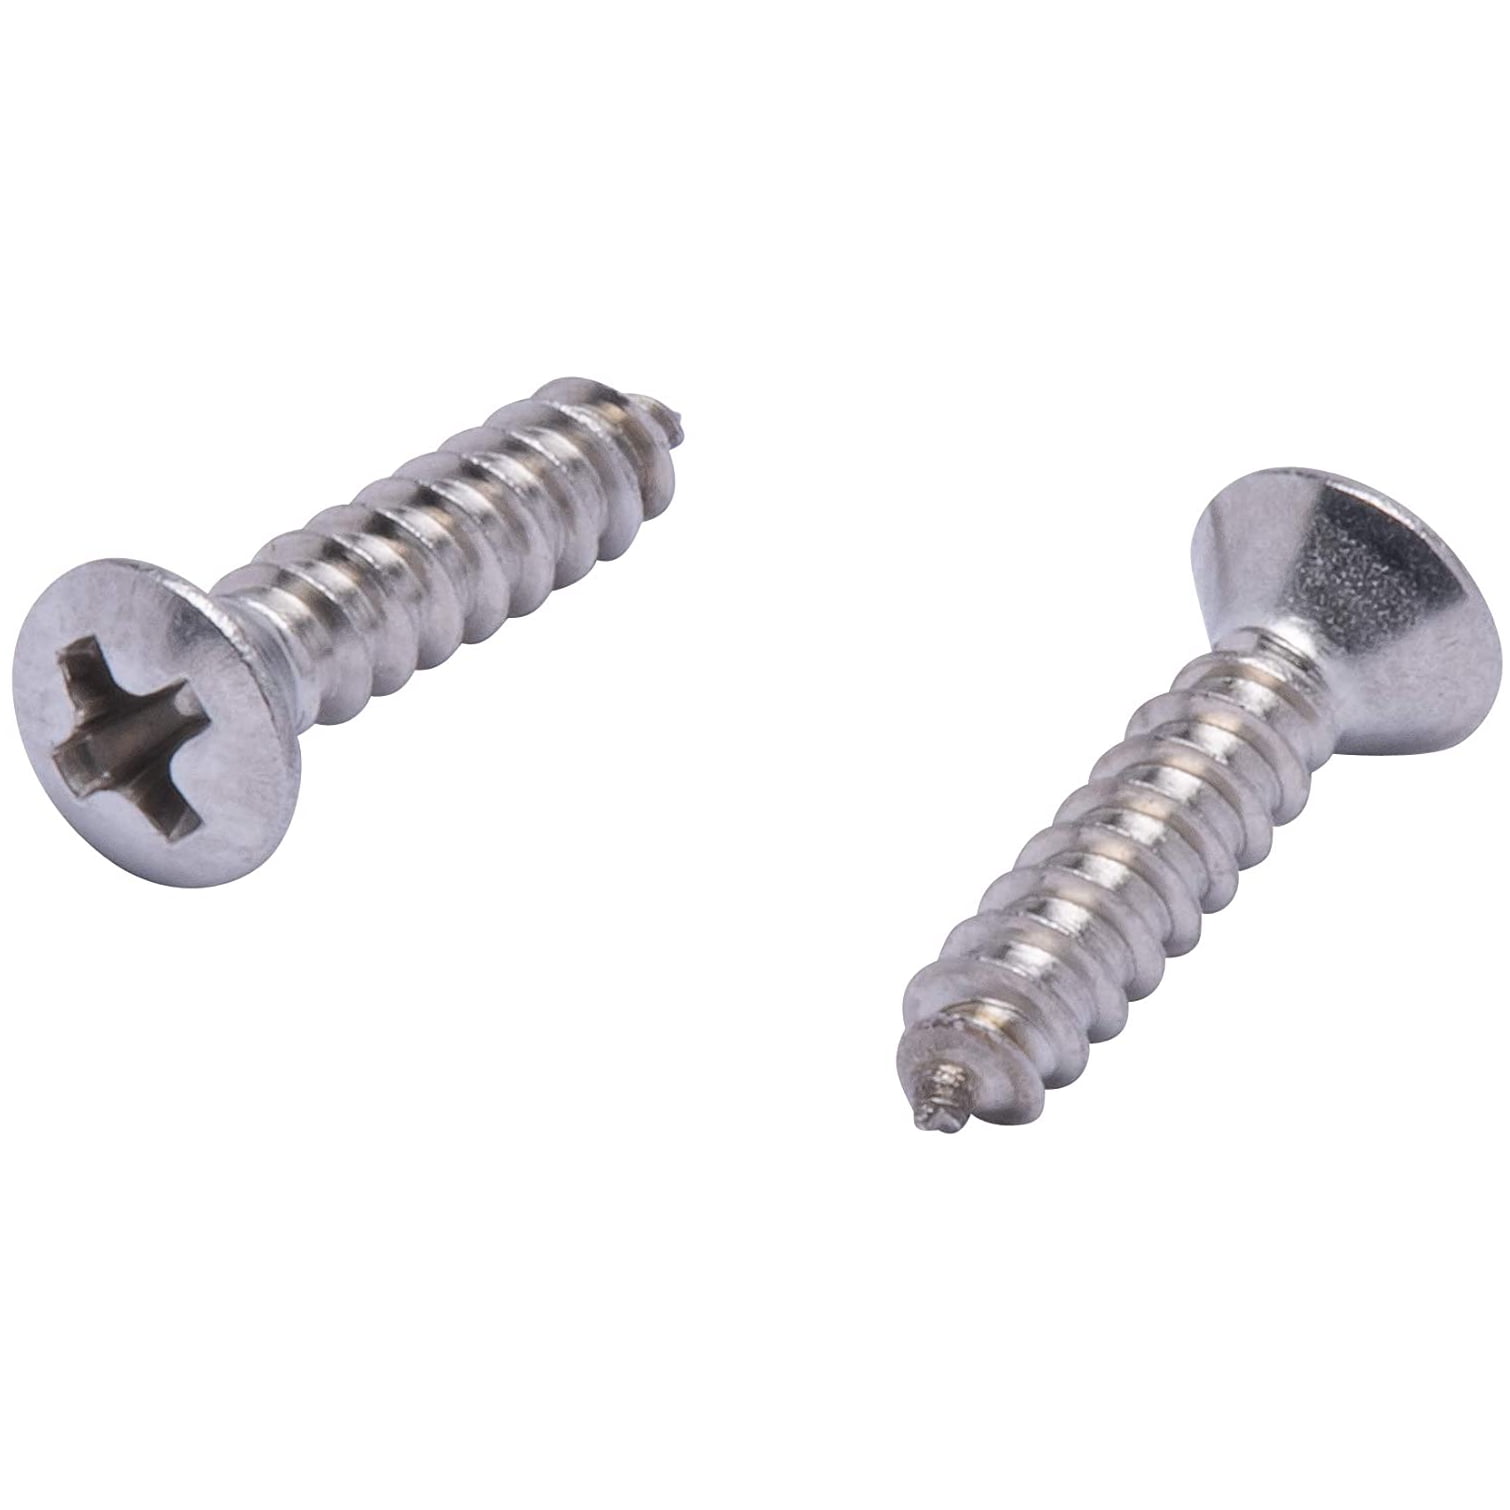 Oval Head Slotted Wood Screw Stainless Steel #4 x 3/4" Qty 50 